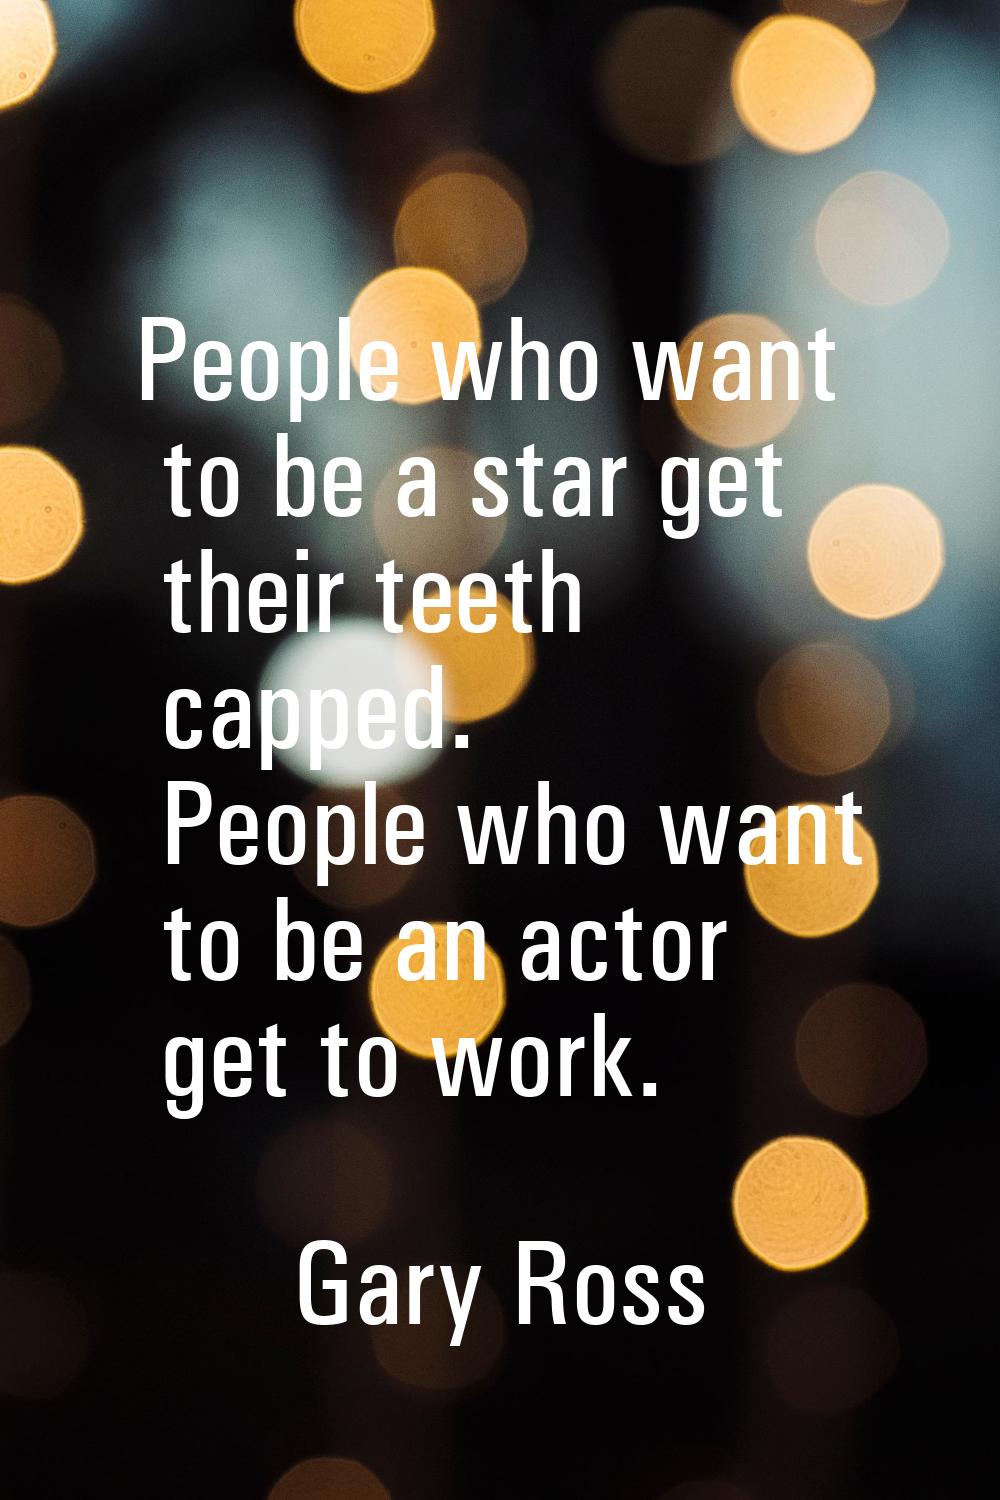 People who want to be a star get their teeth capped. People who want to be an actor get to work.